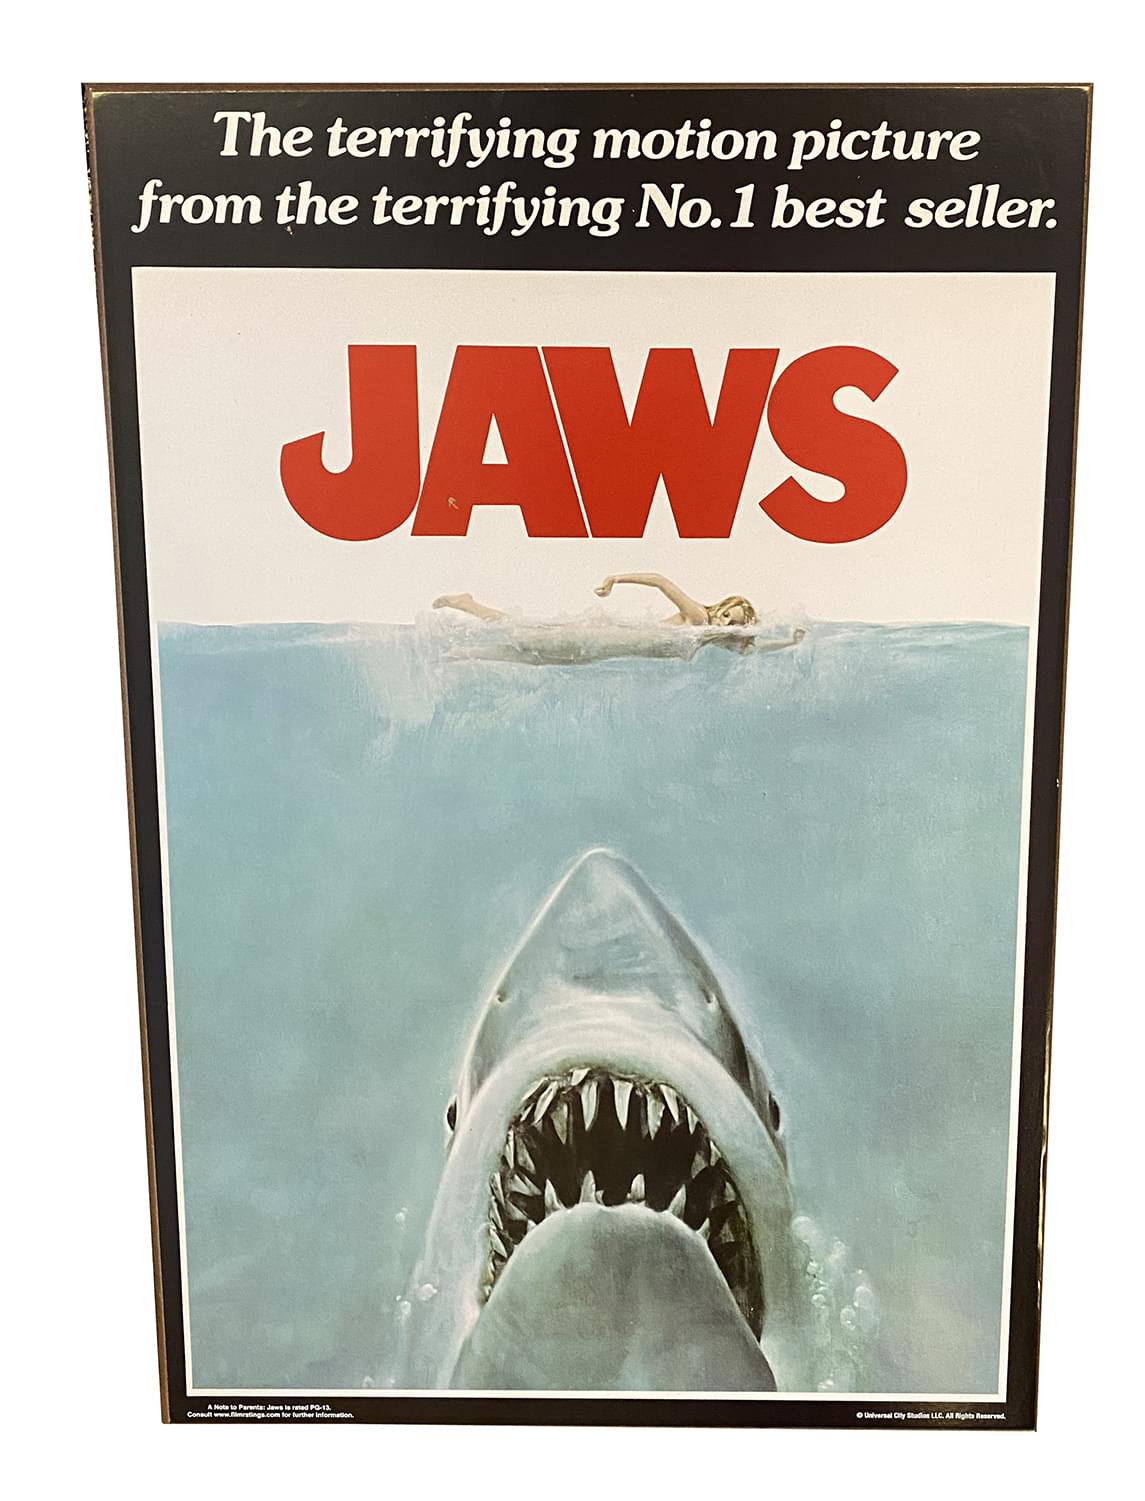 JAWS Movie Poster 13 x 19 Inch Printed Wood Wall Sign